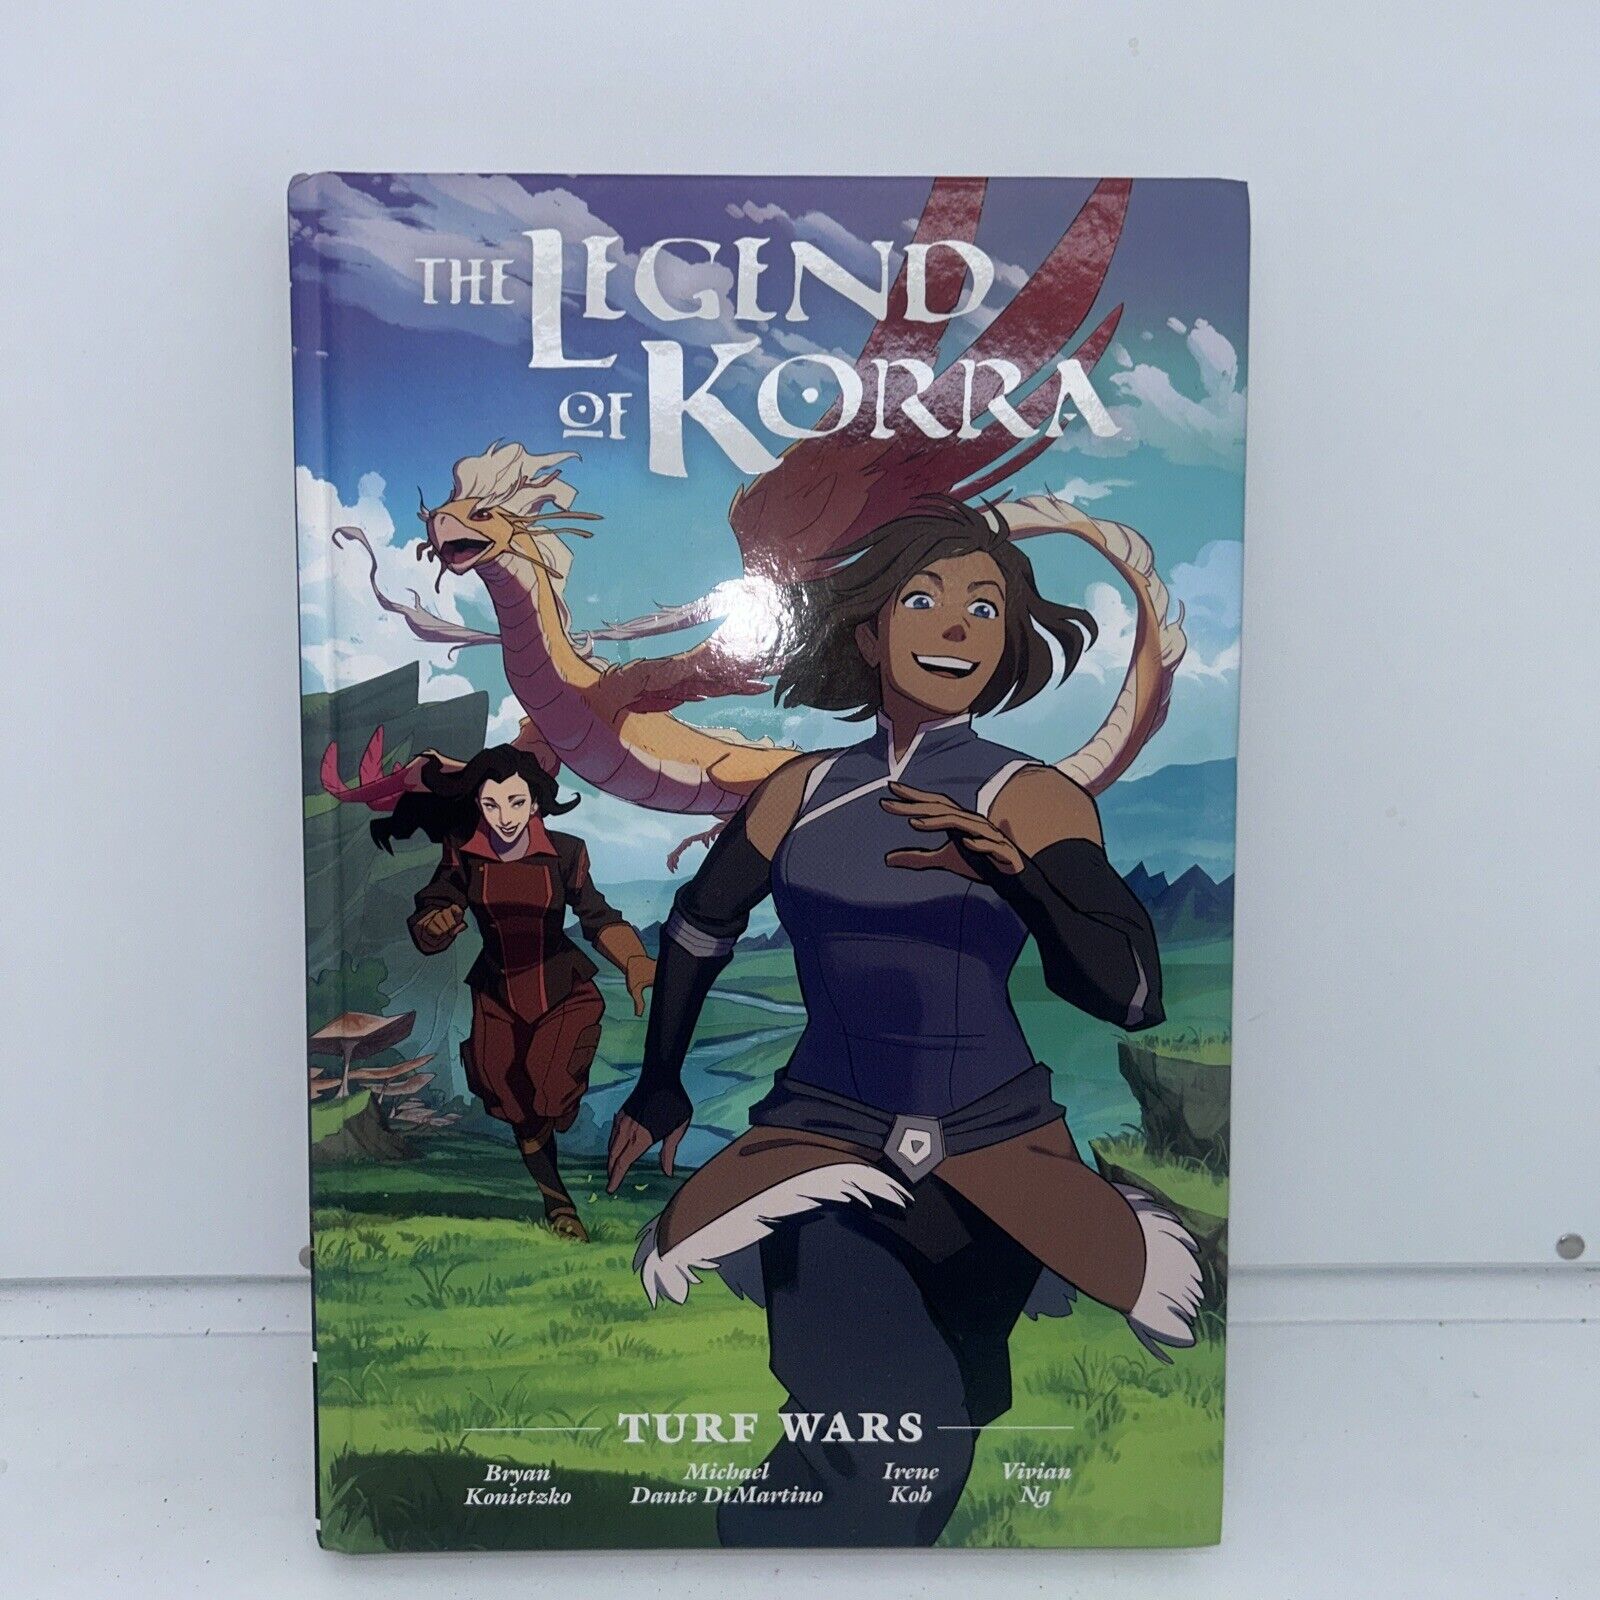 The Legend of Korra: Turf Wars Library Edition by Michael Dante DiMartino: Used